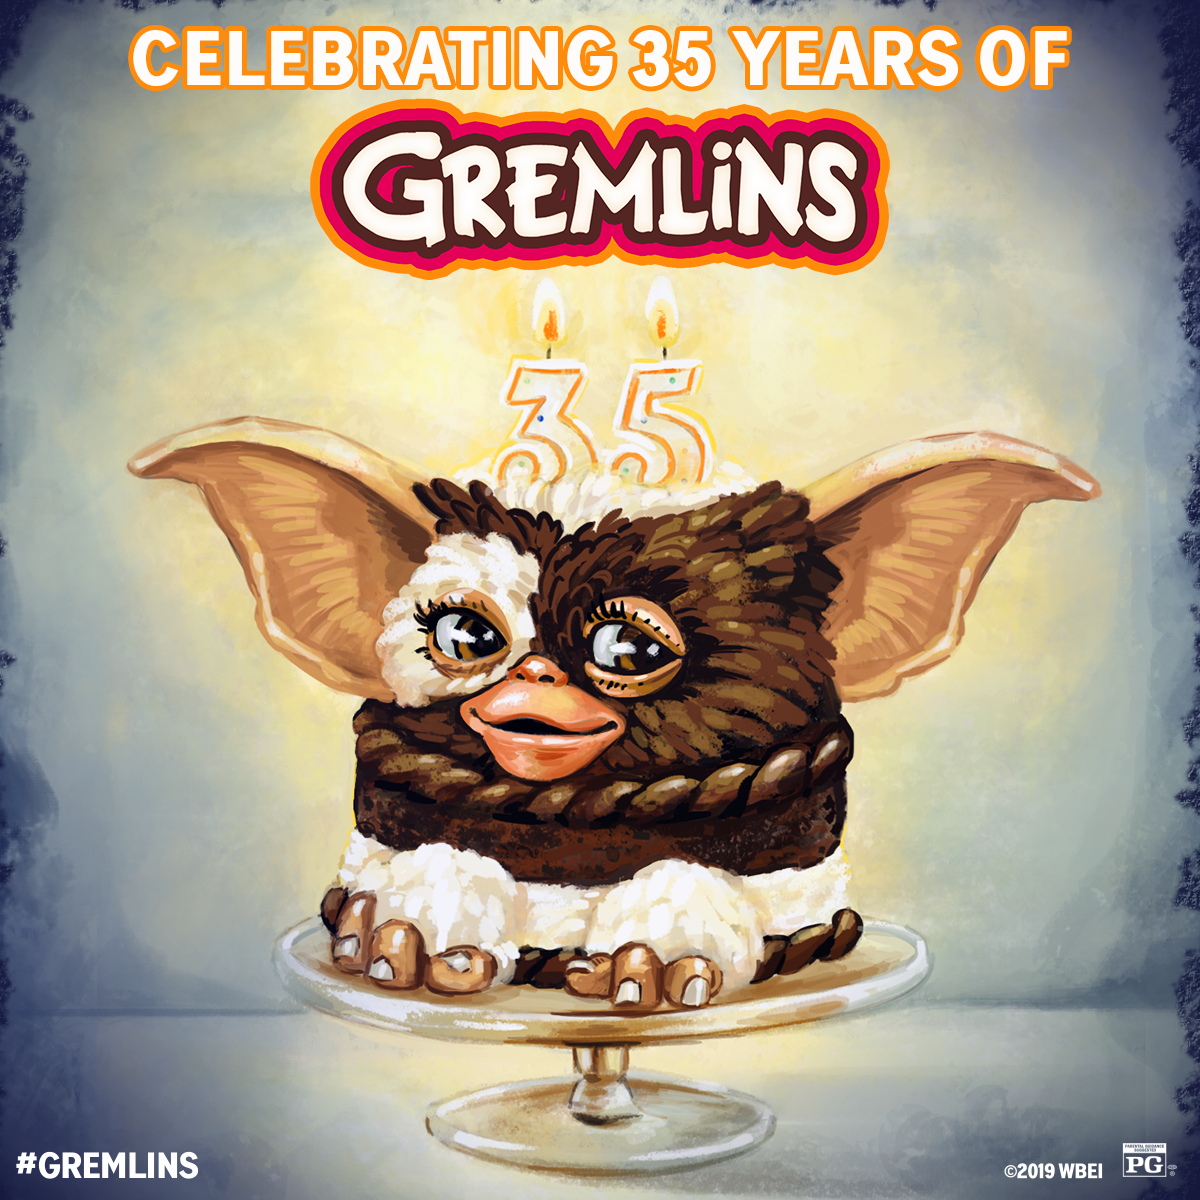 WB_HE_Gremlins_Quotes_Celebrating_Cake_07_CS.PNG